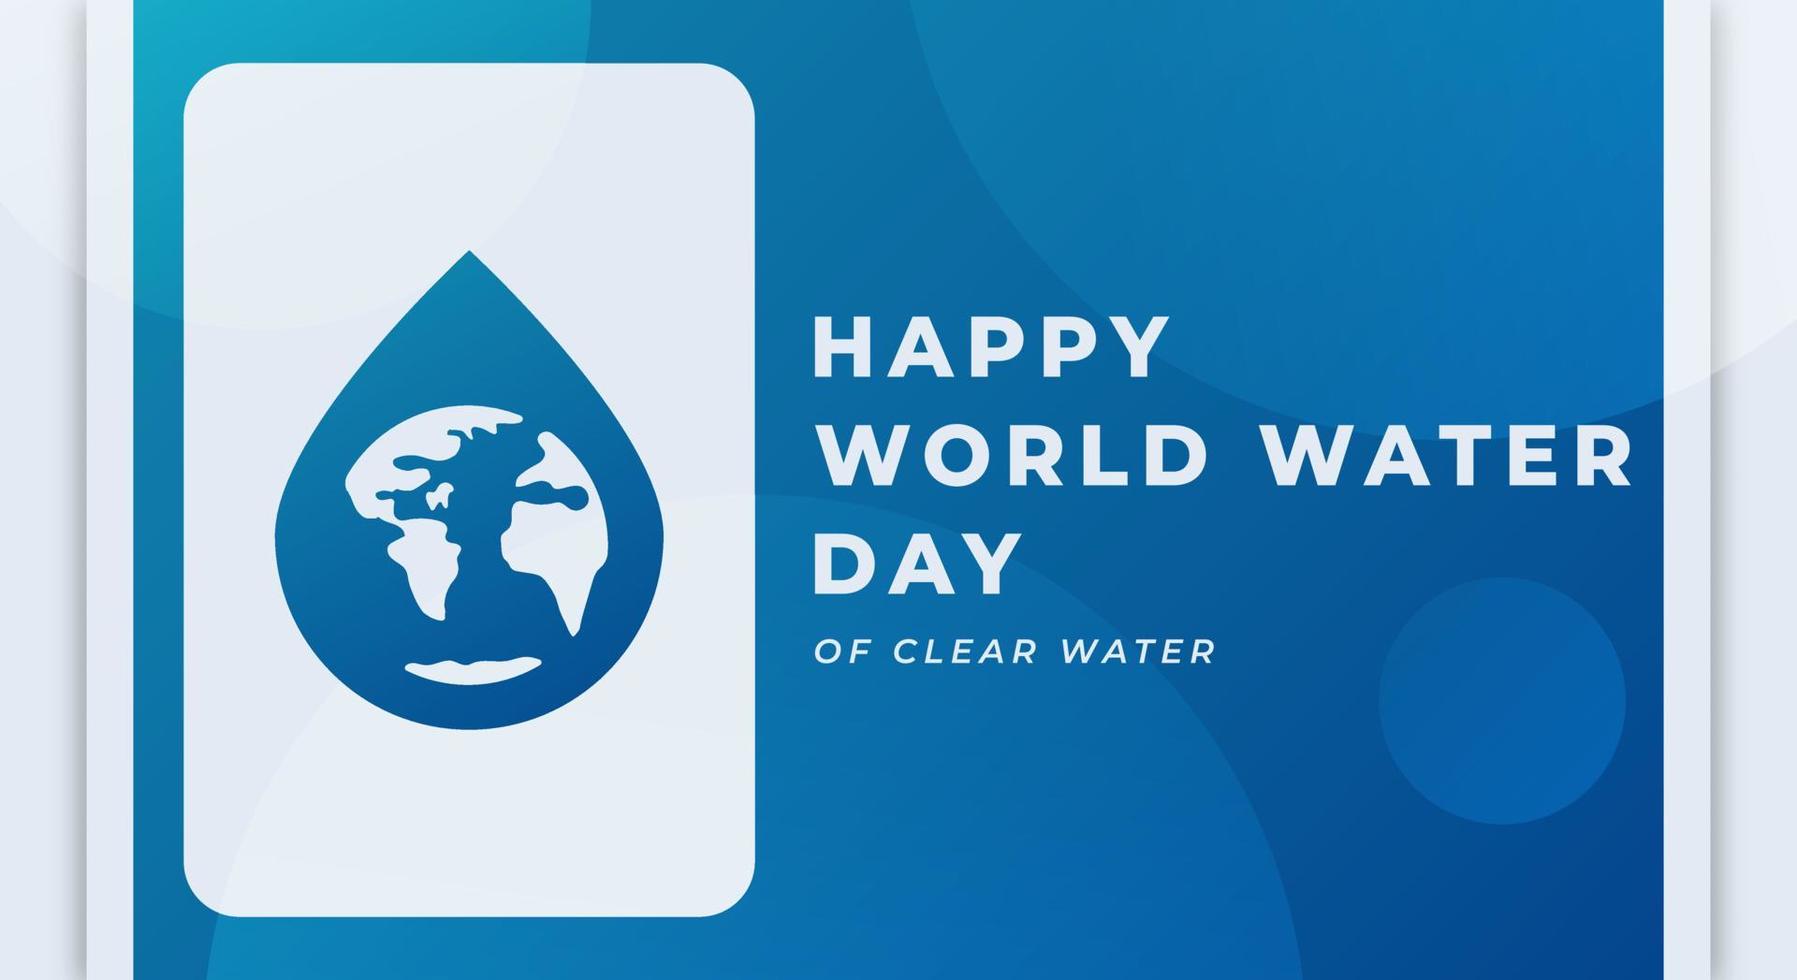 Happy World Water Day Celebration Vector Design Illustration for Background, Poster, Banner, Advertising, Greeting Card